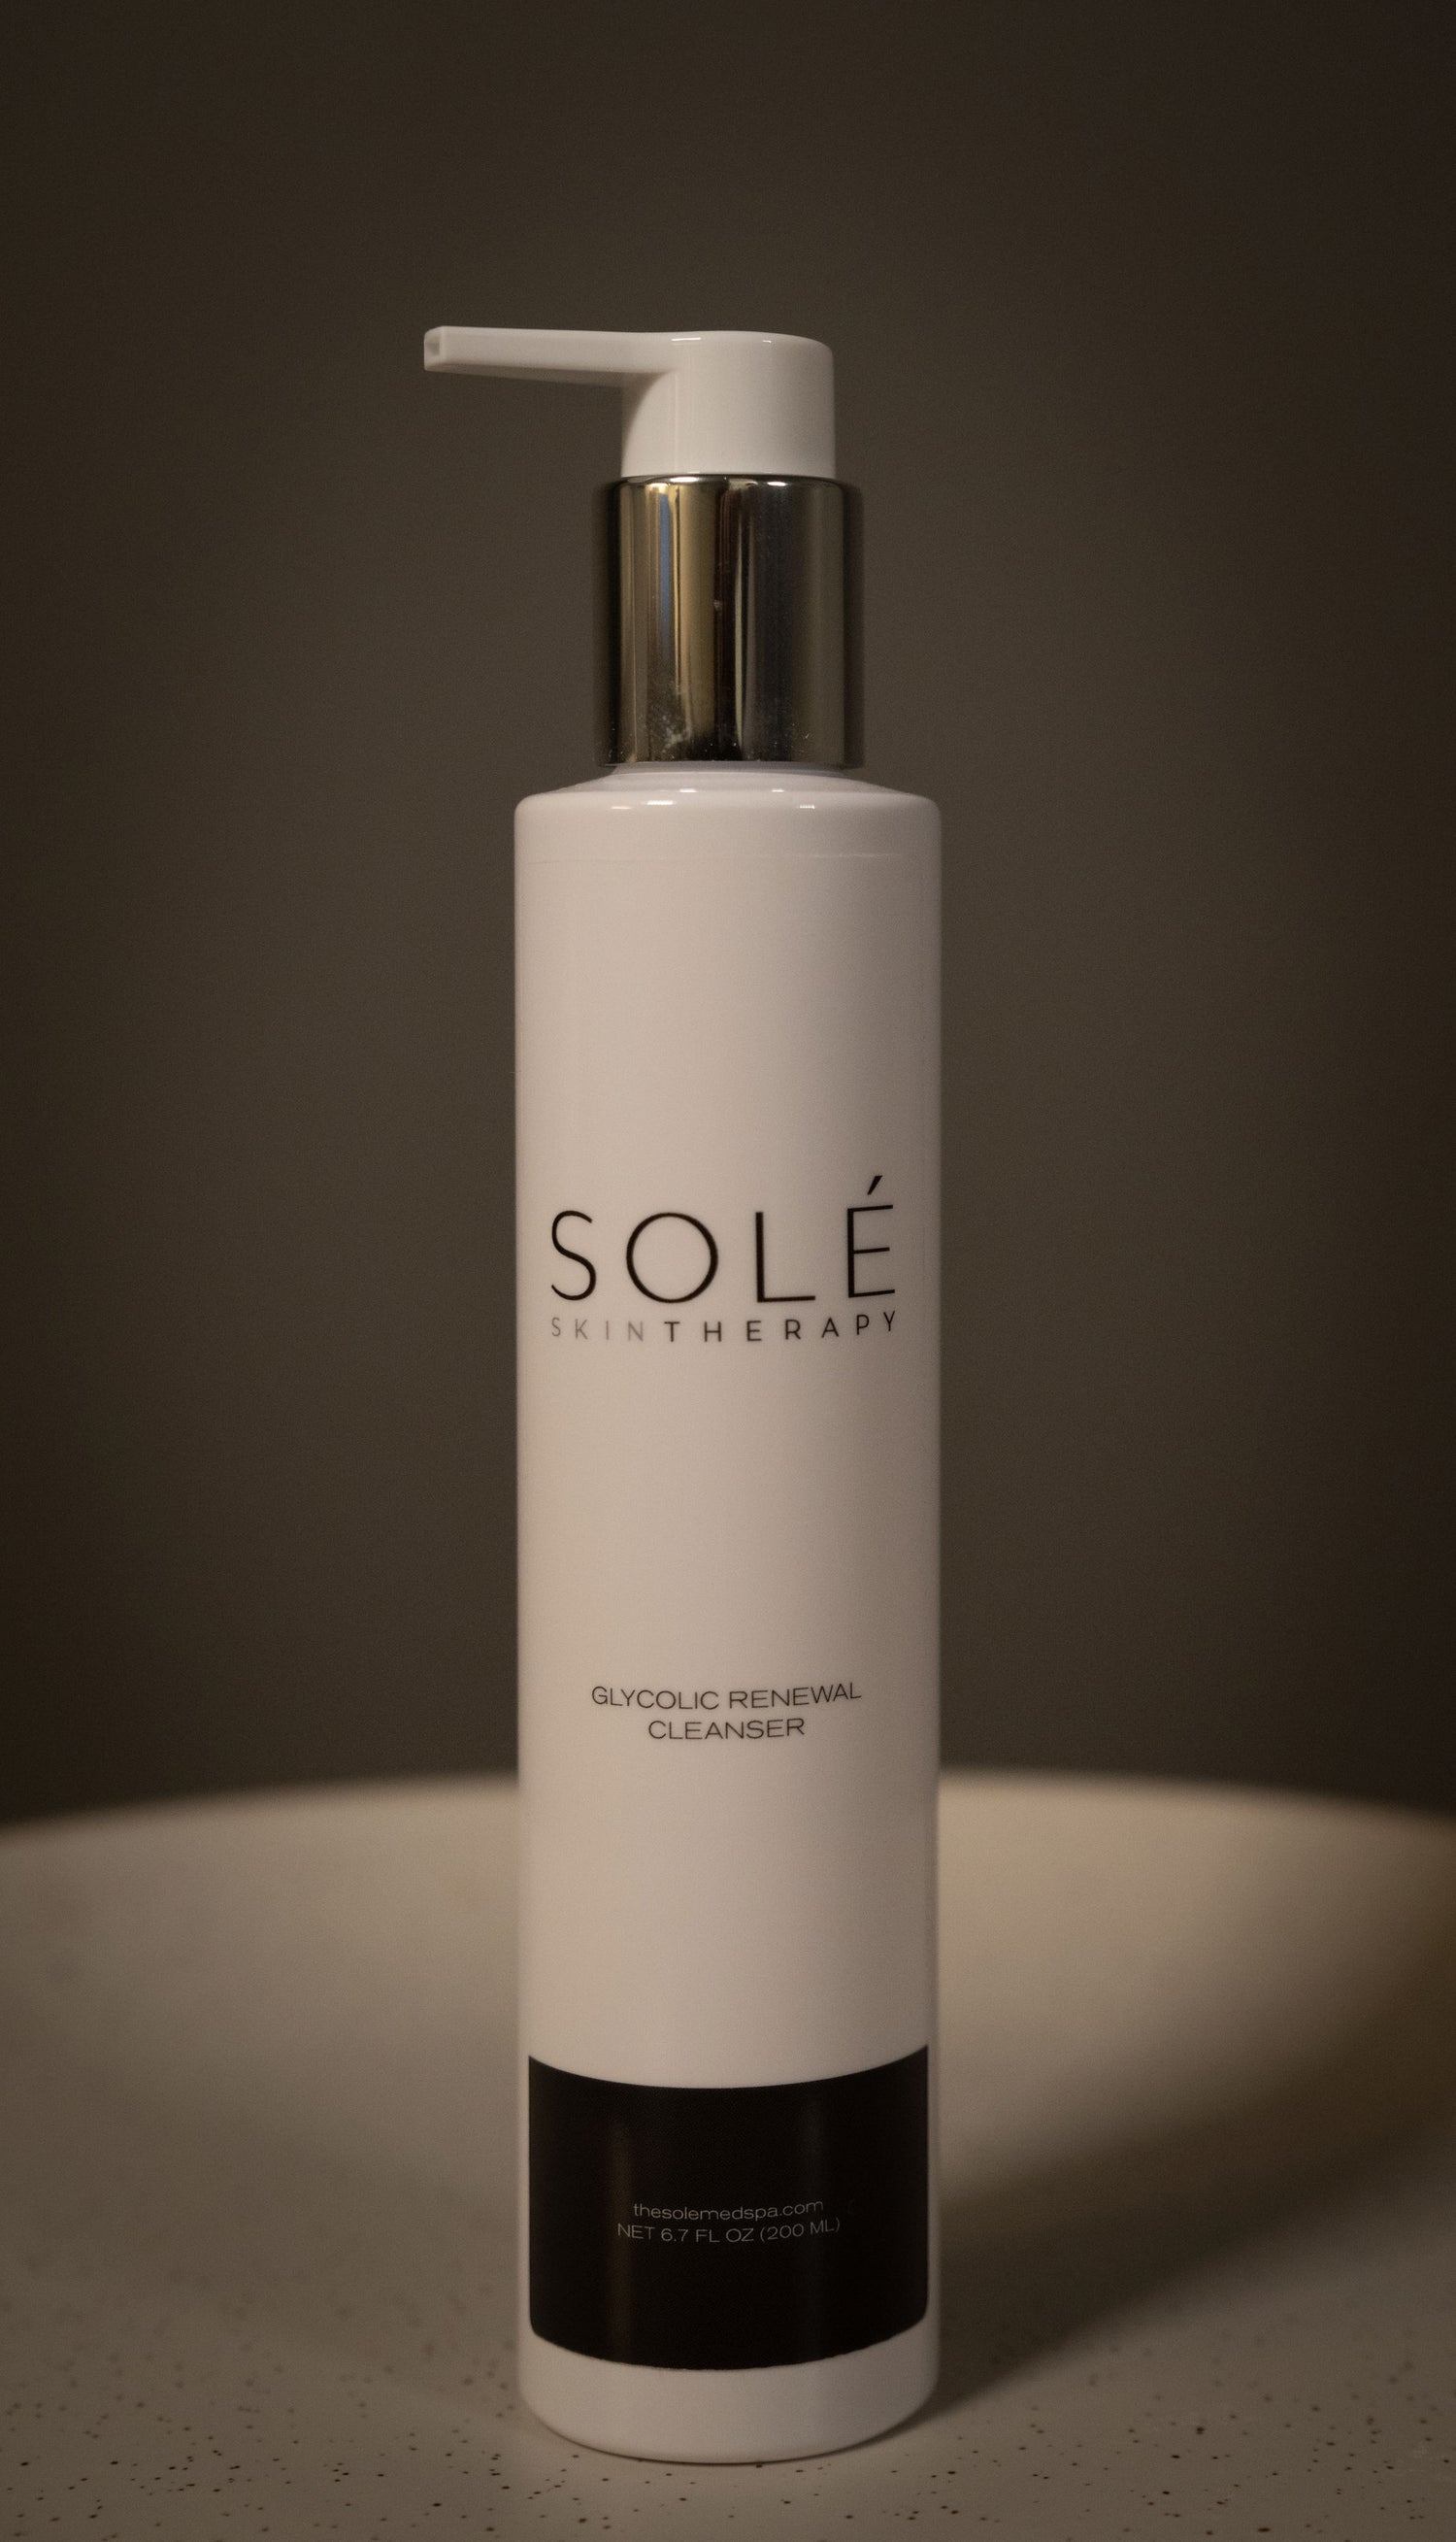 Solé Glycolic Renewal Cleanser